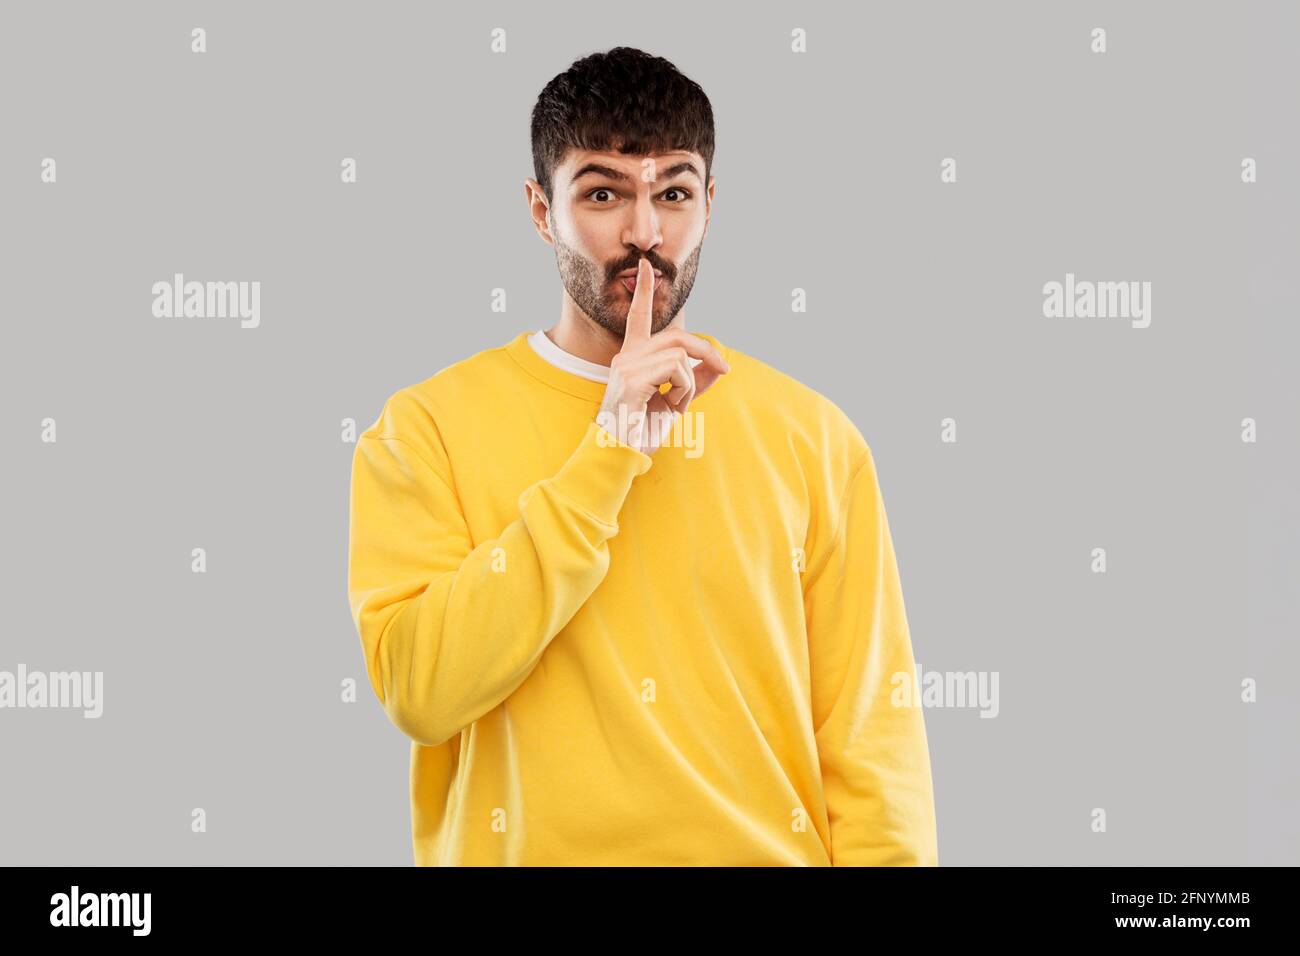 young man making hush gesture with finger on lips Stock Photo